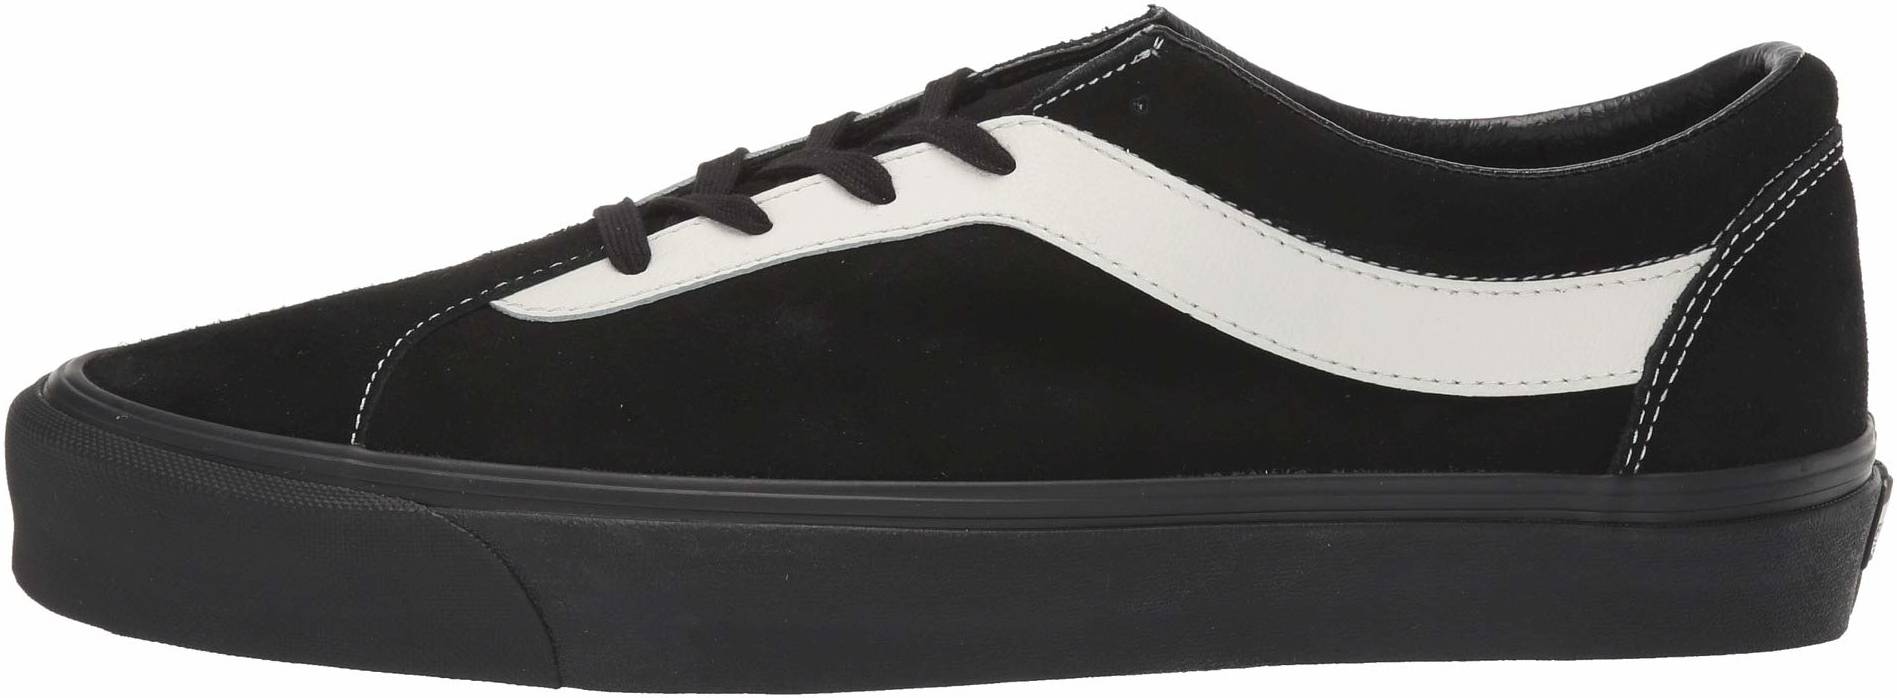 cheapest place to buy van shoes